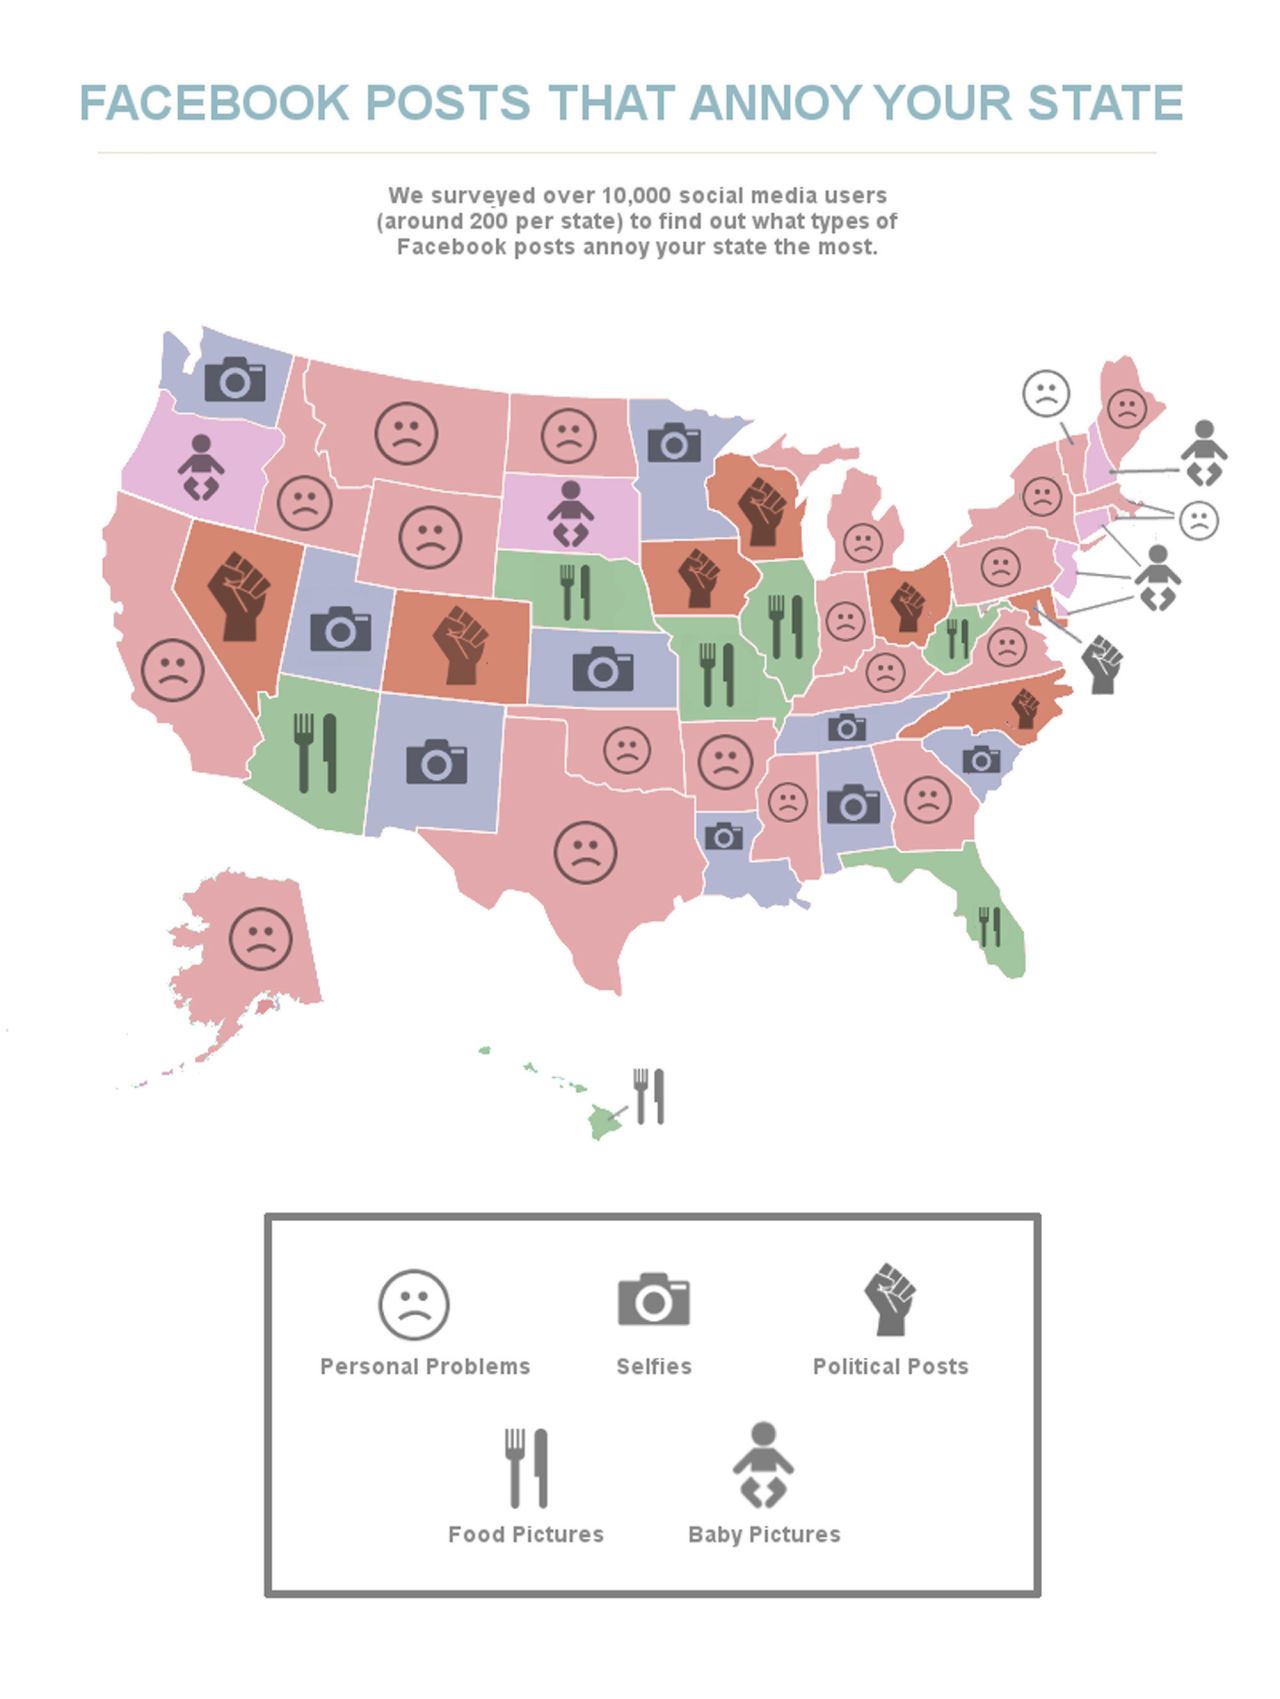 Most annoying Facebook posts by state